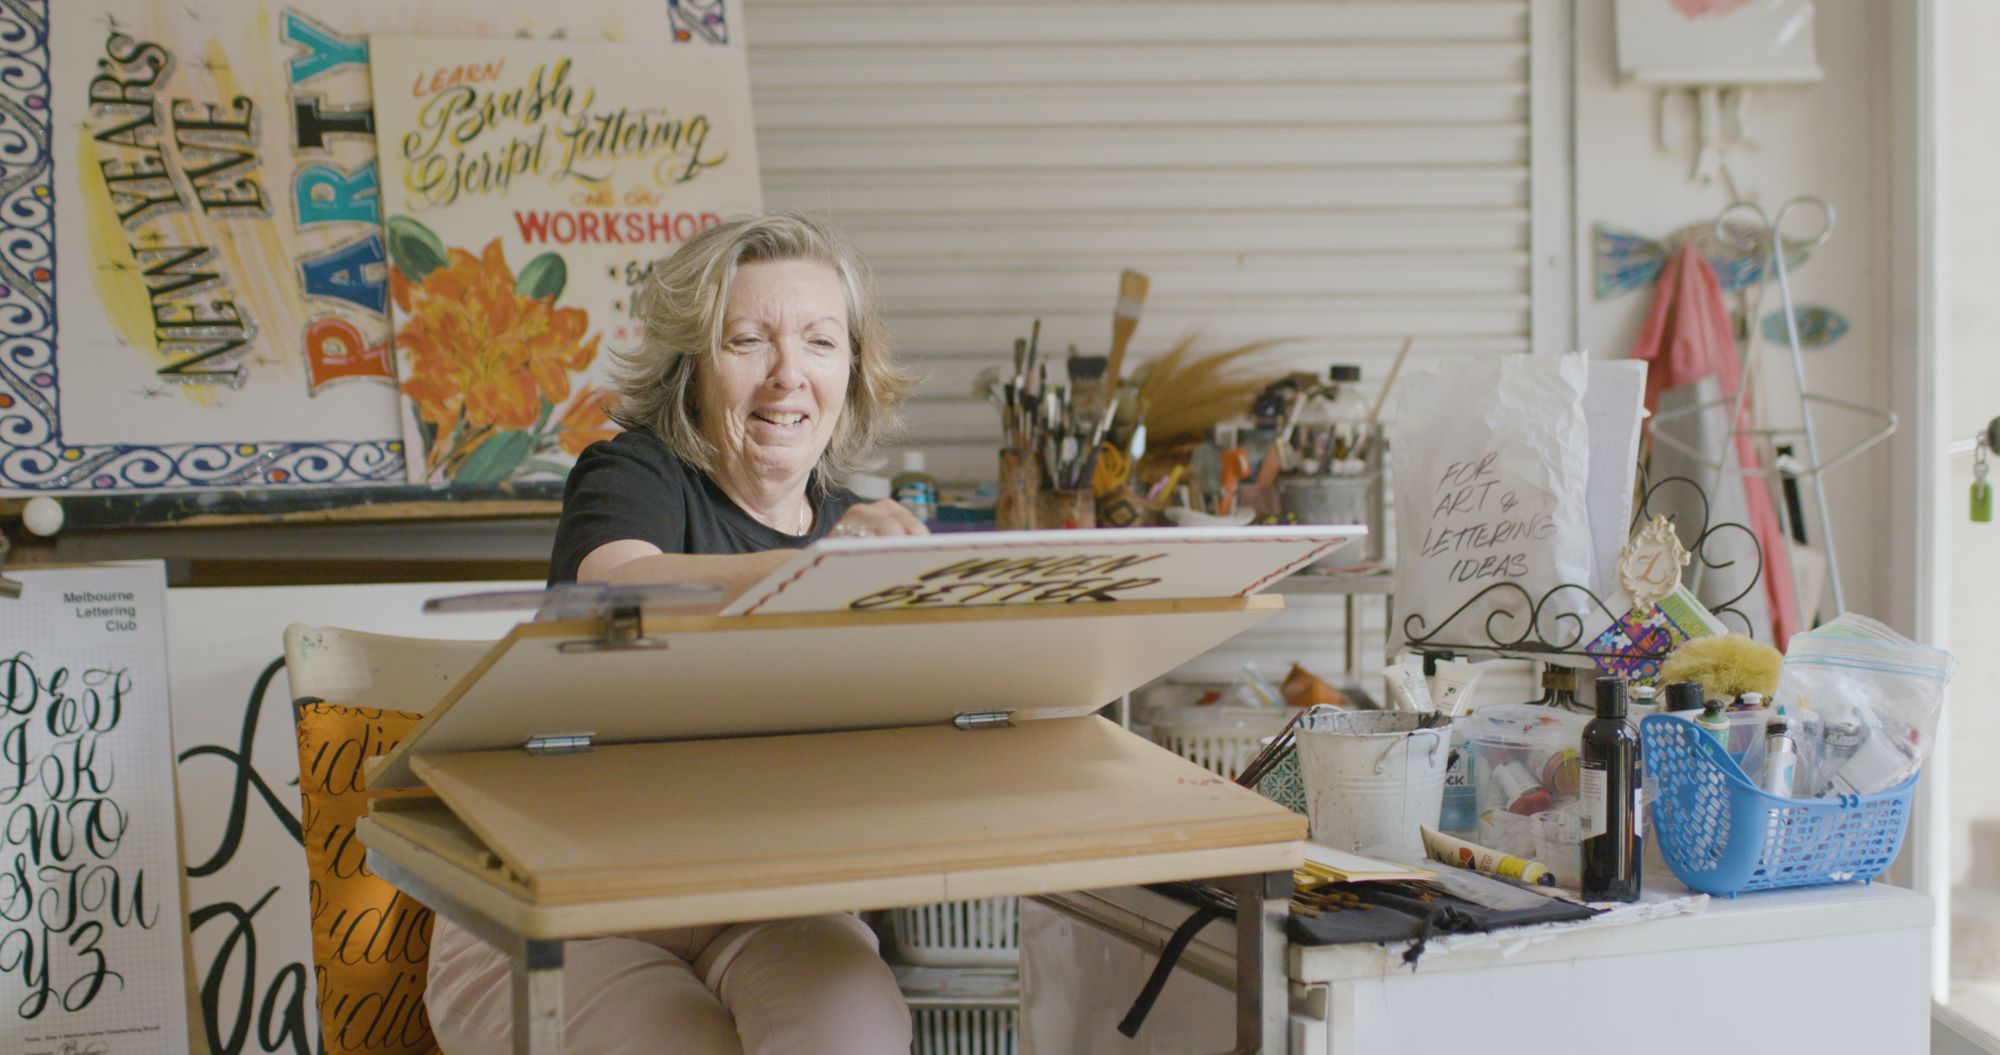 Woman smiling while working at an easel in an artists' studio.